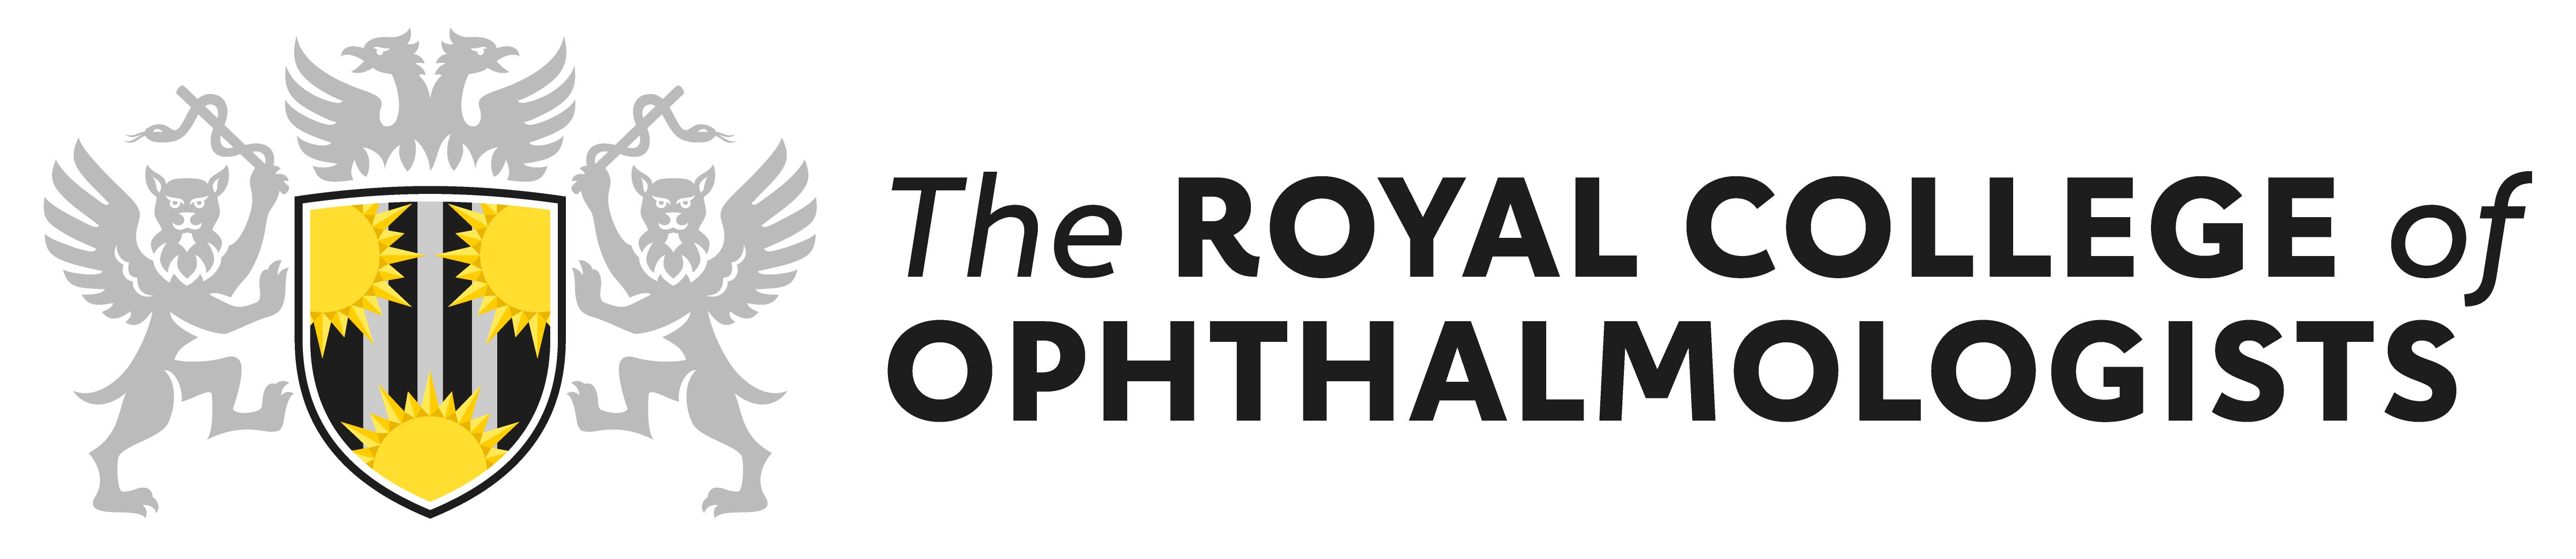 The Royal College of Ophthalmology logo